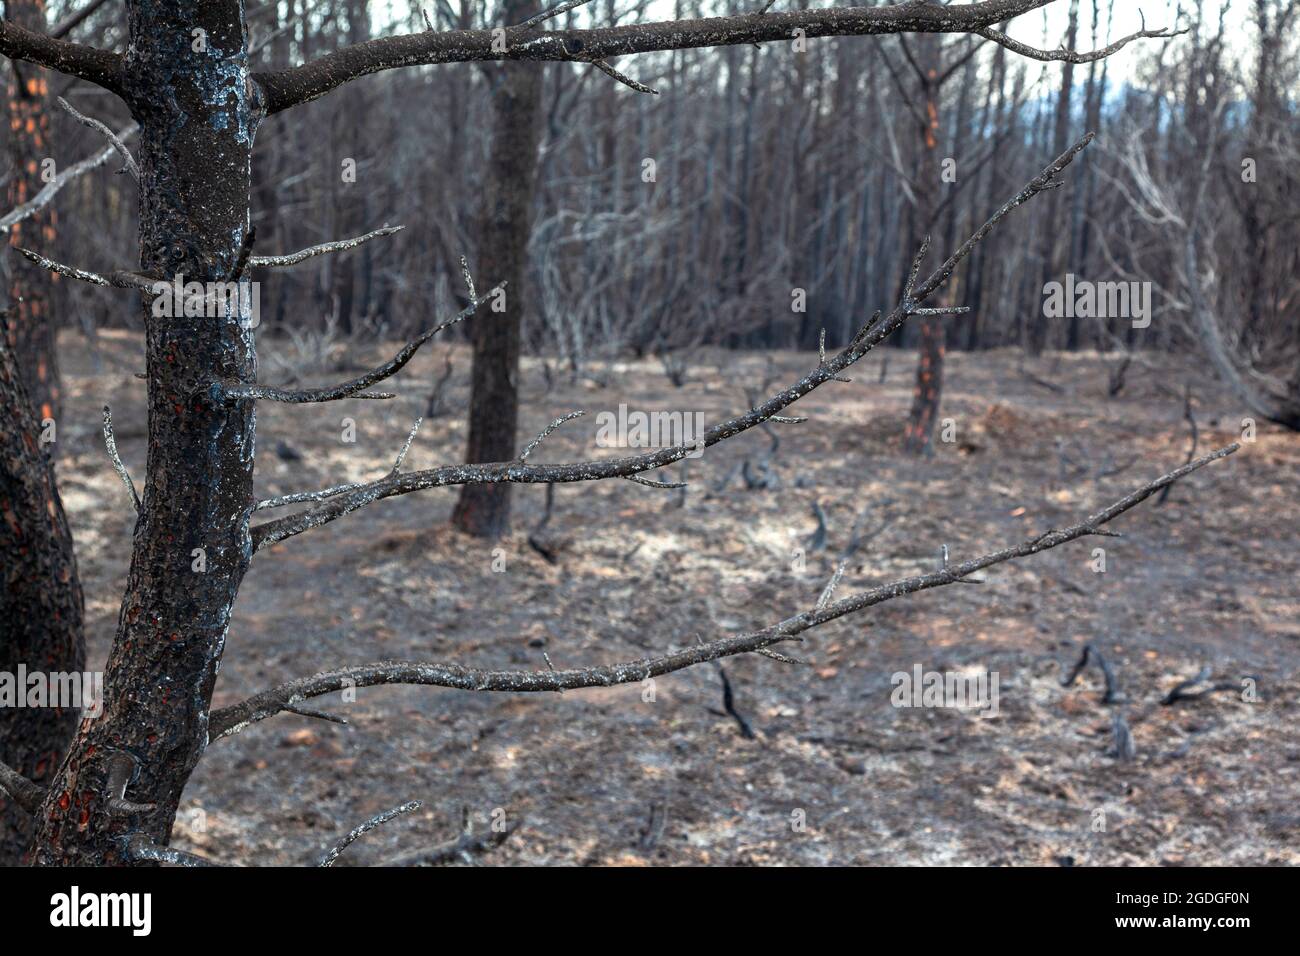 Burned forest in Attica, Greece, after the bushfires at Parnitha Mount and the districts of Varympompi and Tatoi, in early August 2021. Stock Photo